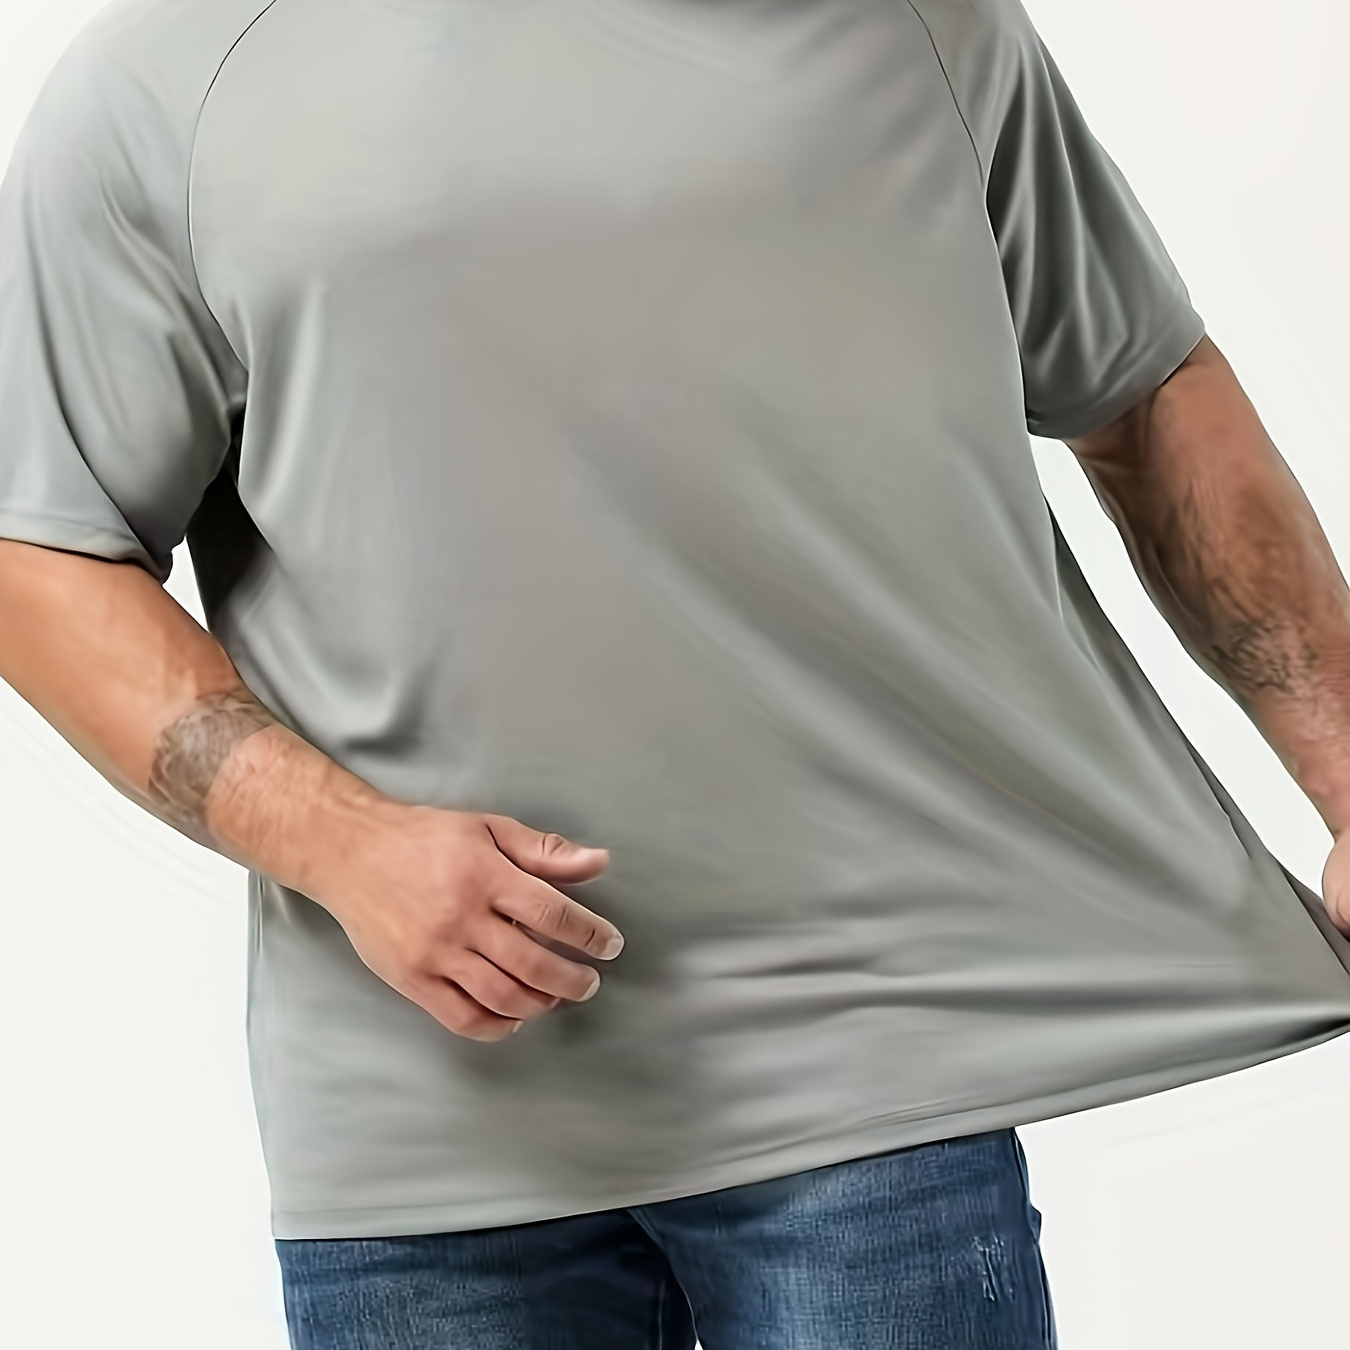 Plus Size Men's Solid T-shirt Sports Casual Short Sleeve Tees For Summer, Men's Clothing